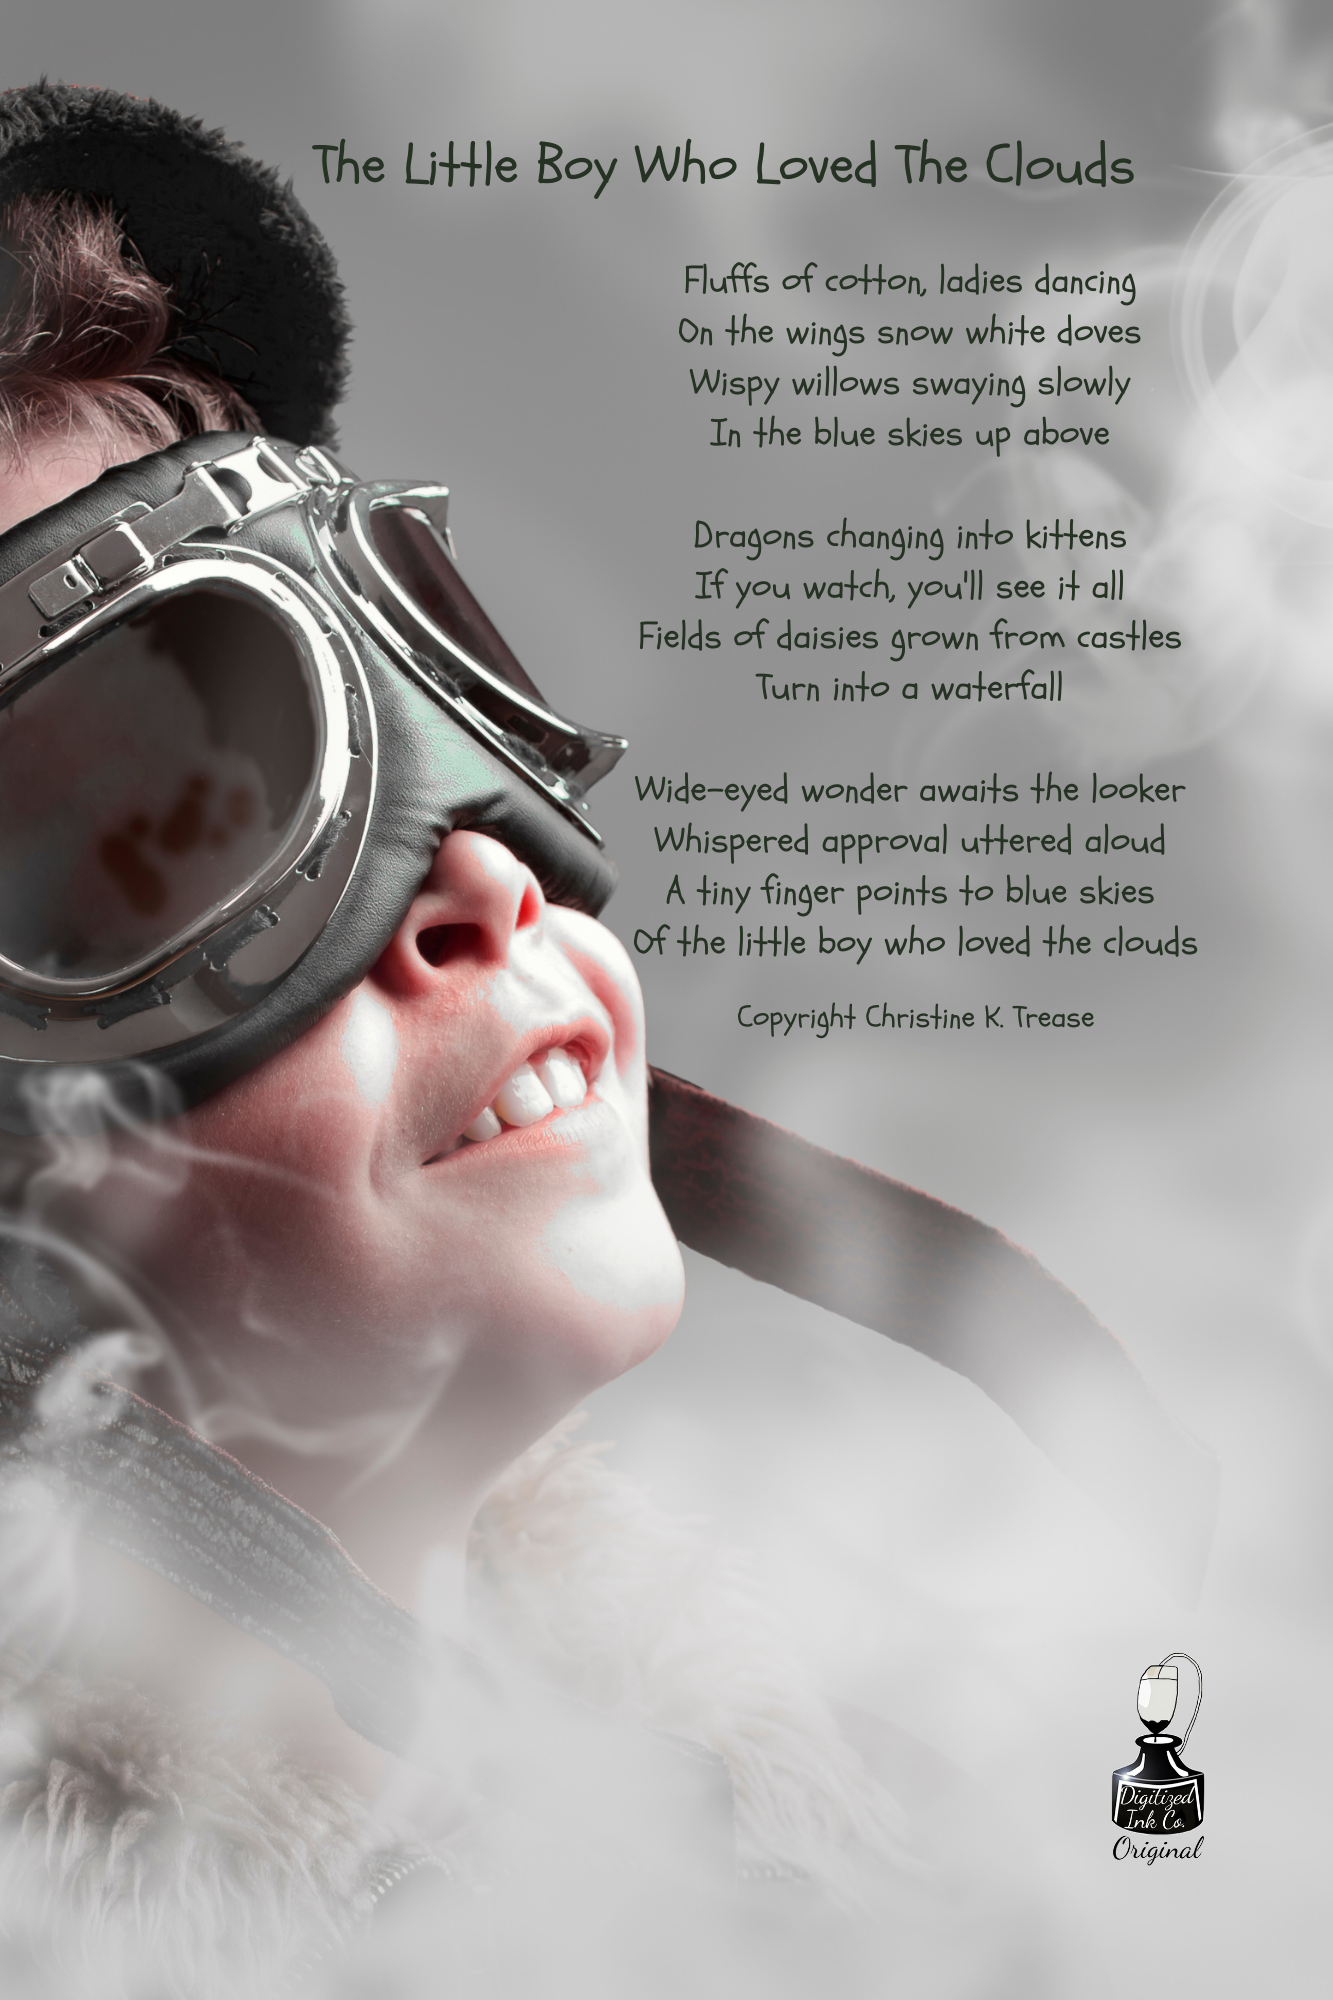 Poetography Art Prints Children - The Little Boy Who Loved The Clouds